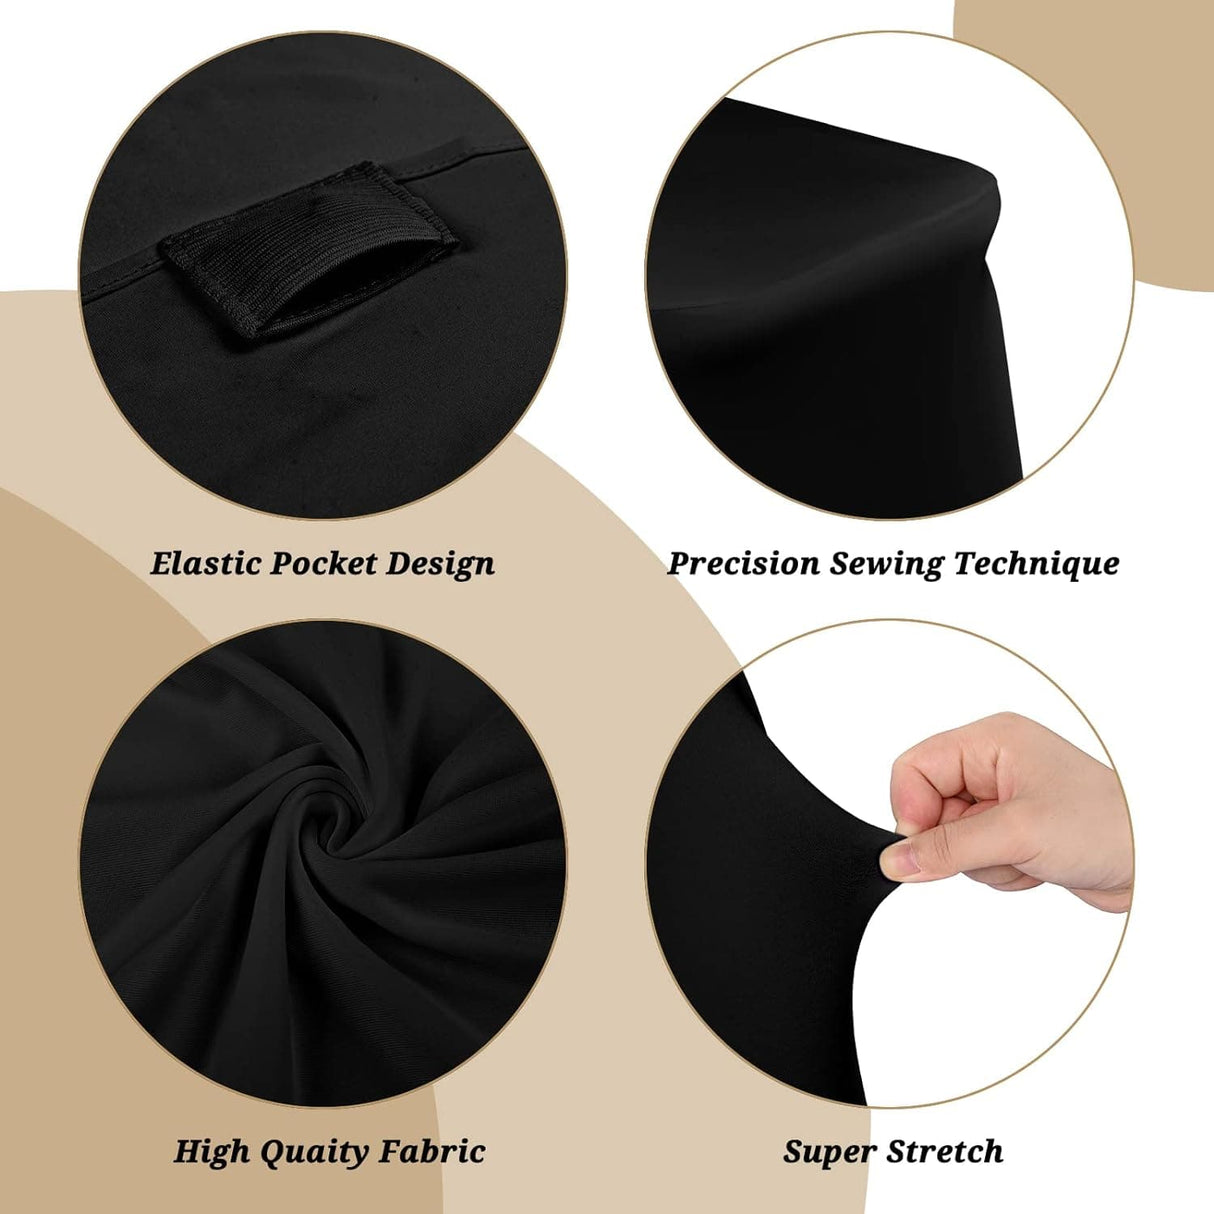 10pcs Chair Covers  Polyester Spandex Lycra Stretch Chair Cover Dining Room Wedding Chair Covers Universal Washable Protective Chair Covers for Wedding Party Banquet Decoration Covers